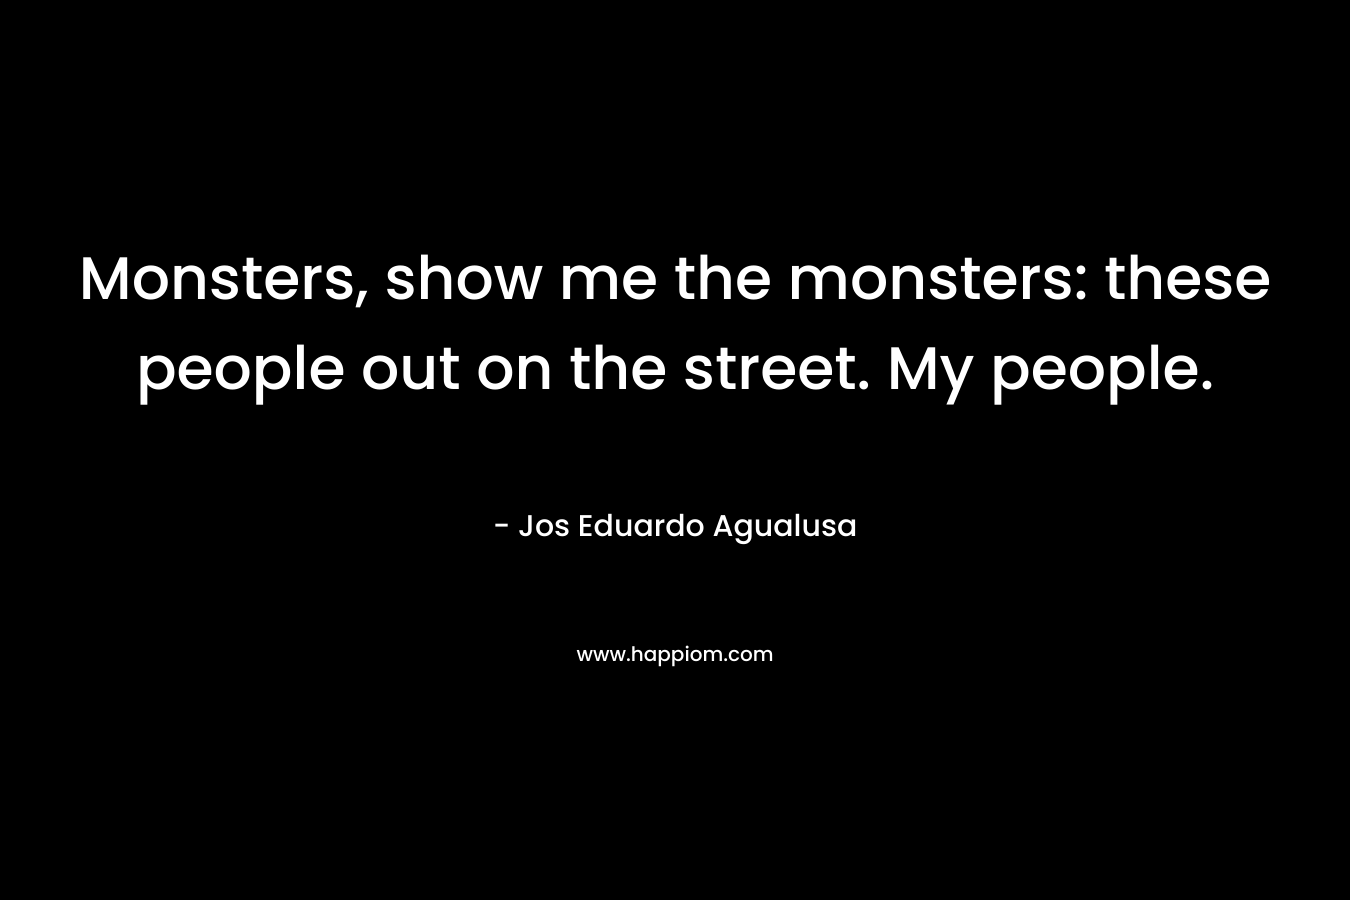 Monsters, show me the monsters: these people out on the street. My people. – Jos Eduardo Agualusa